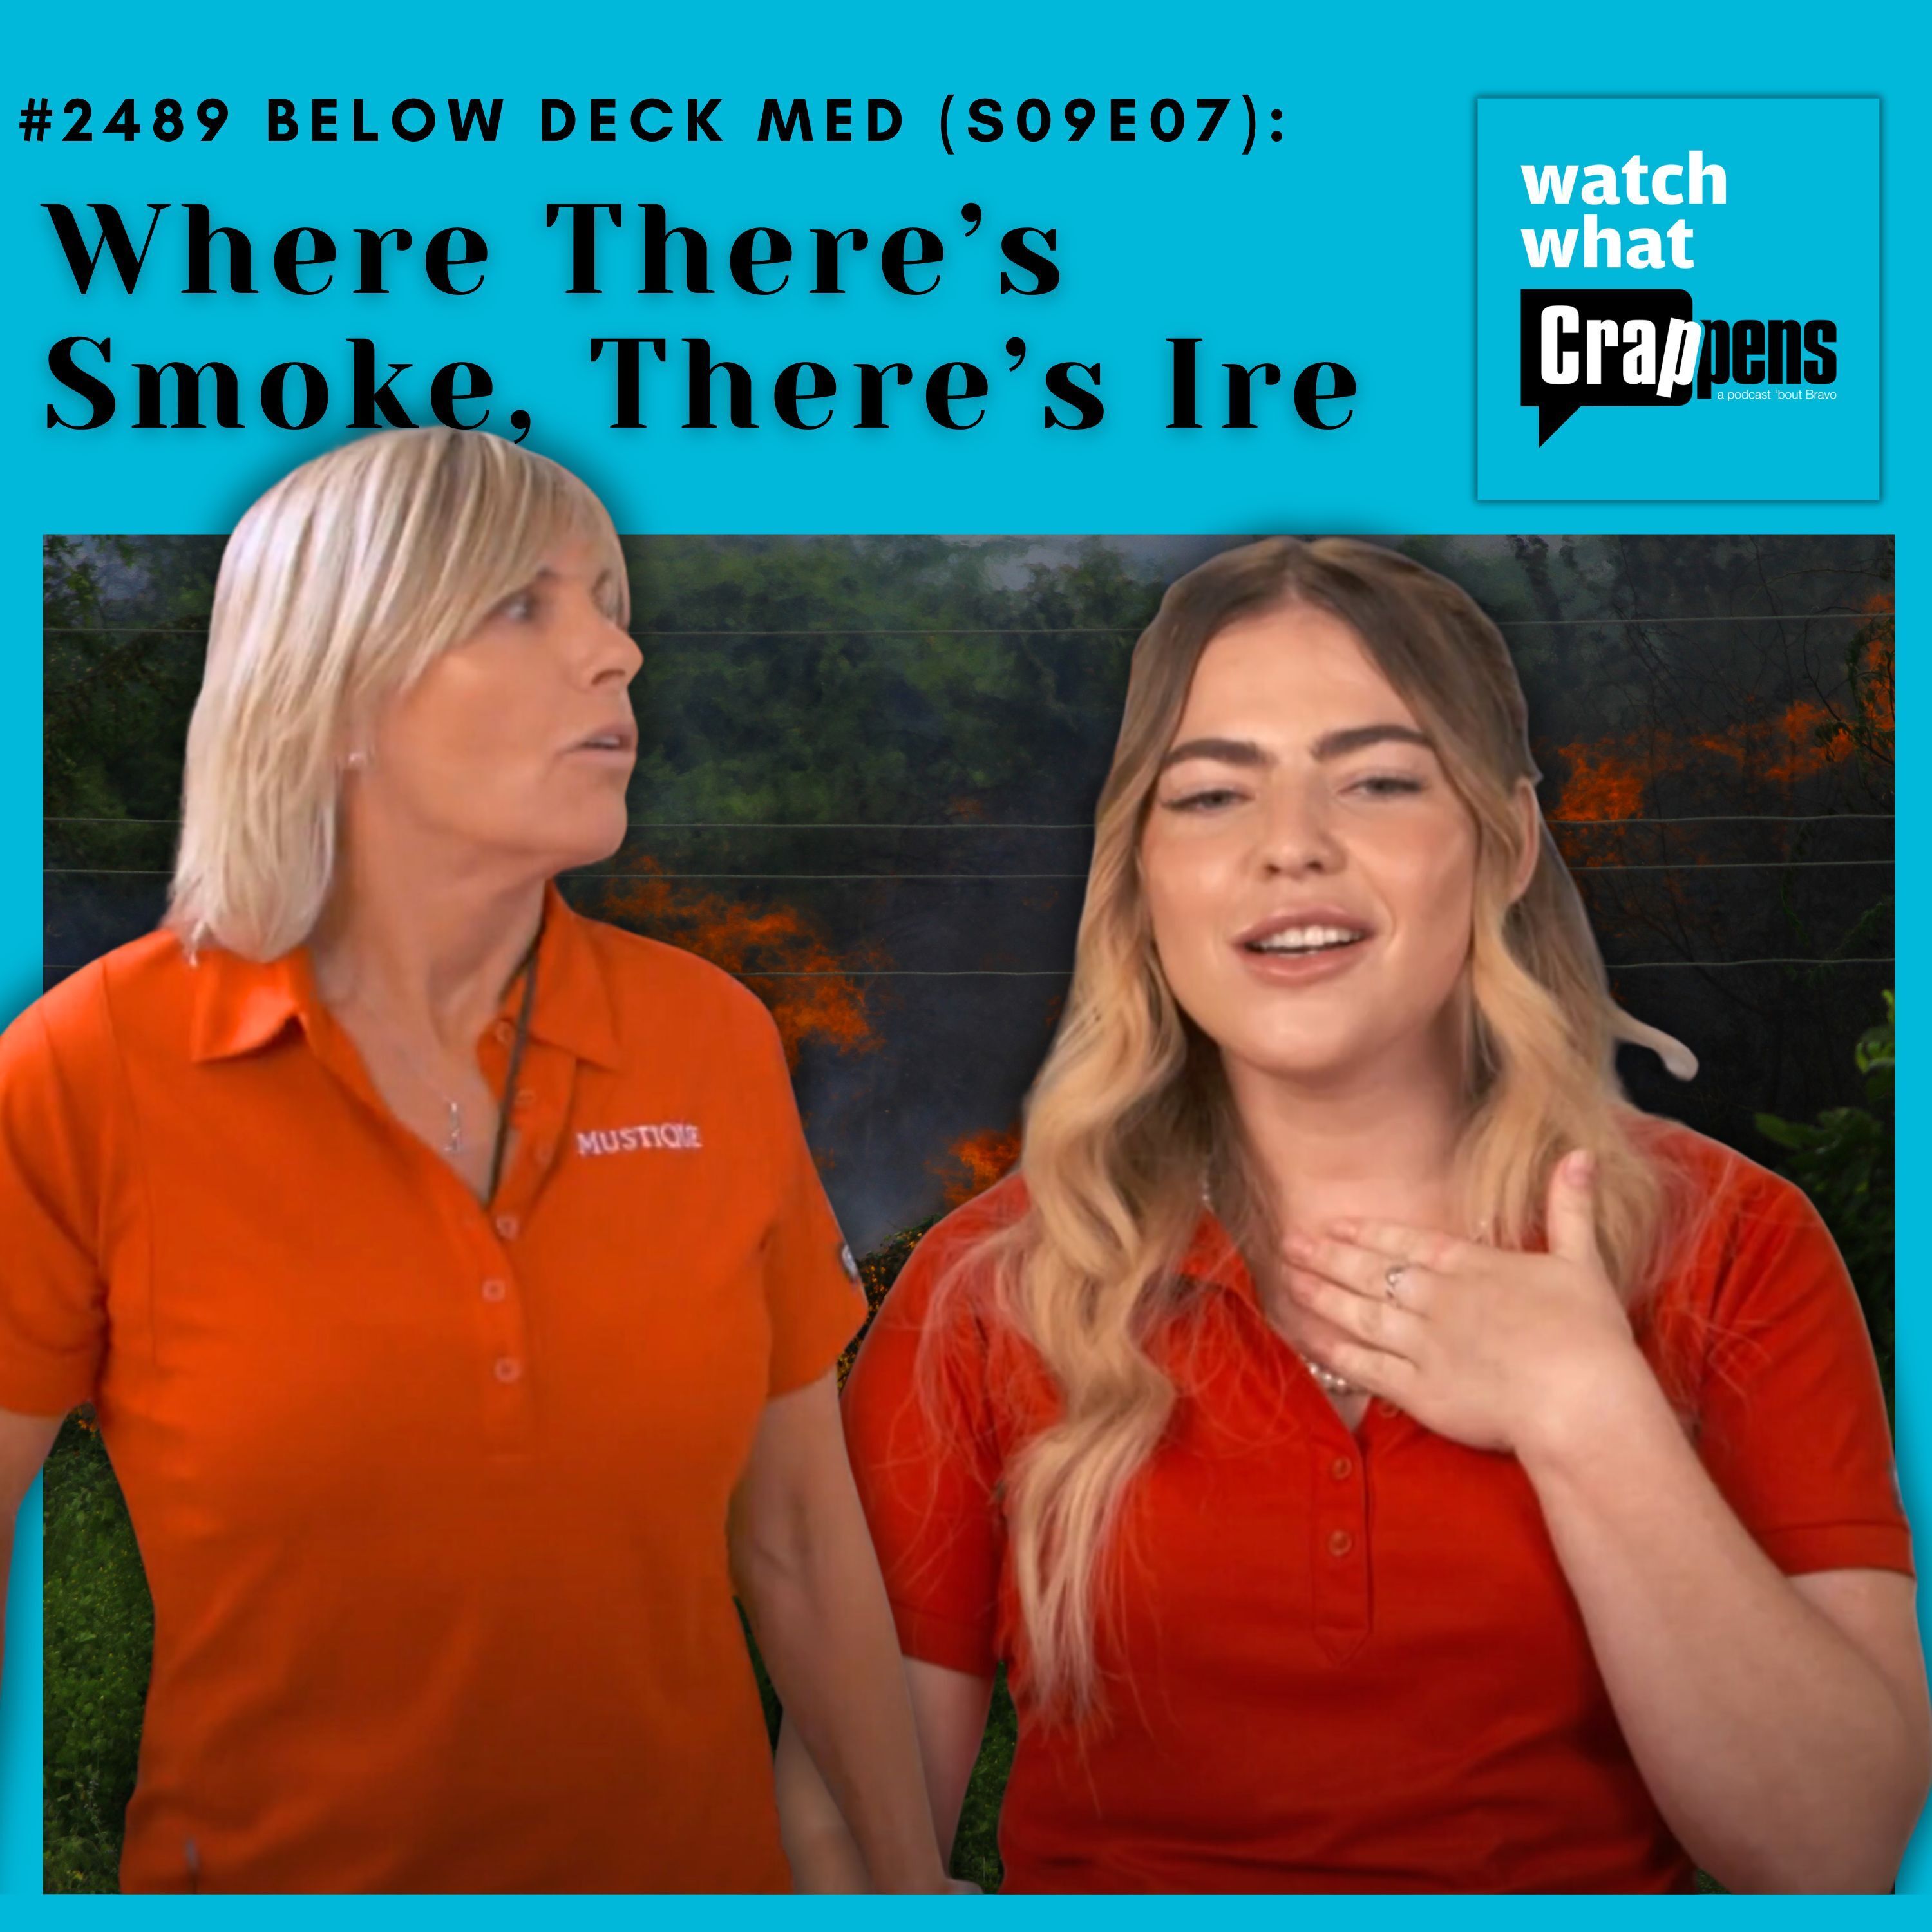 #2489  Below Deck Med (S09E07): Where There’s Smoke, There’s Ire